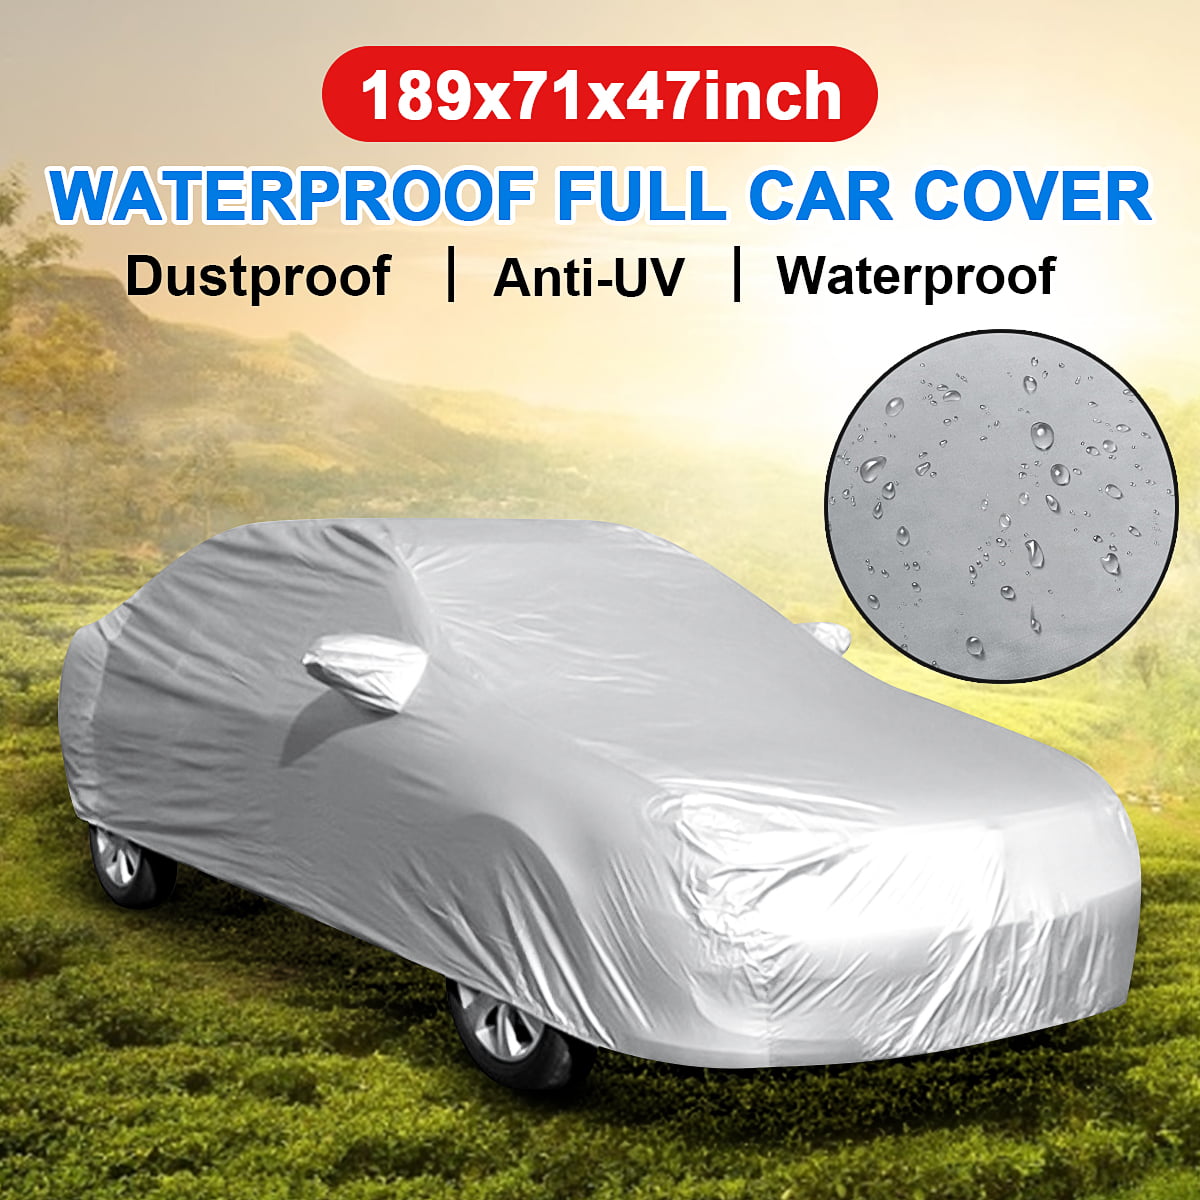 91B Top Car Cover Protector fits VAUXHALL INSIGNIA Frost Ice Snow Sun 